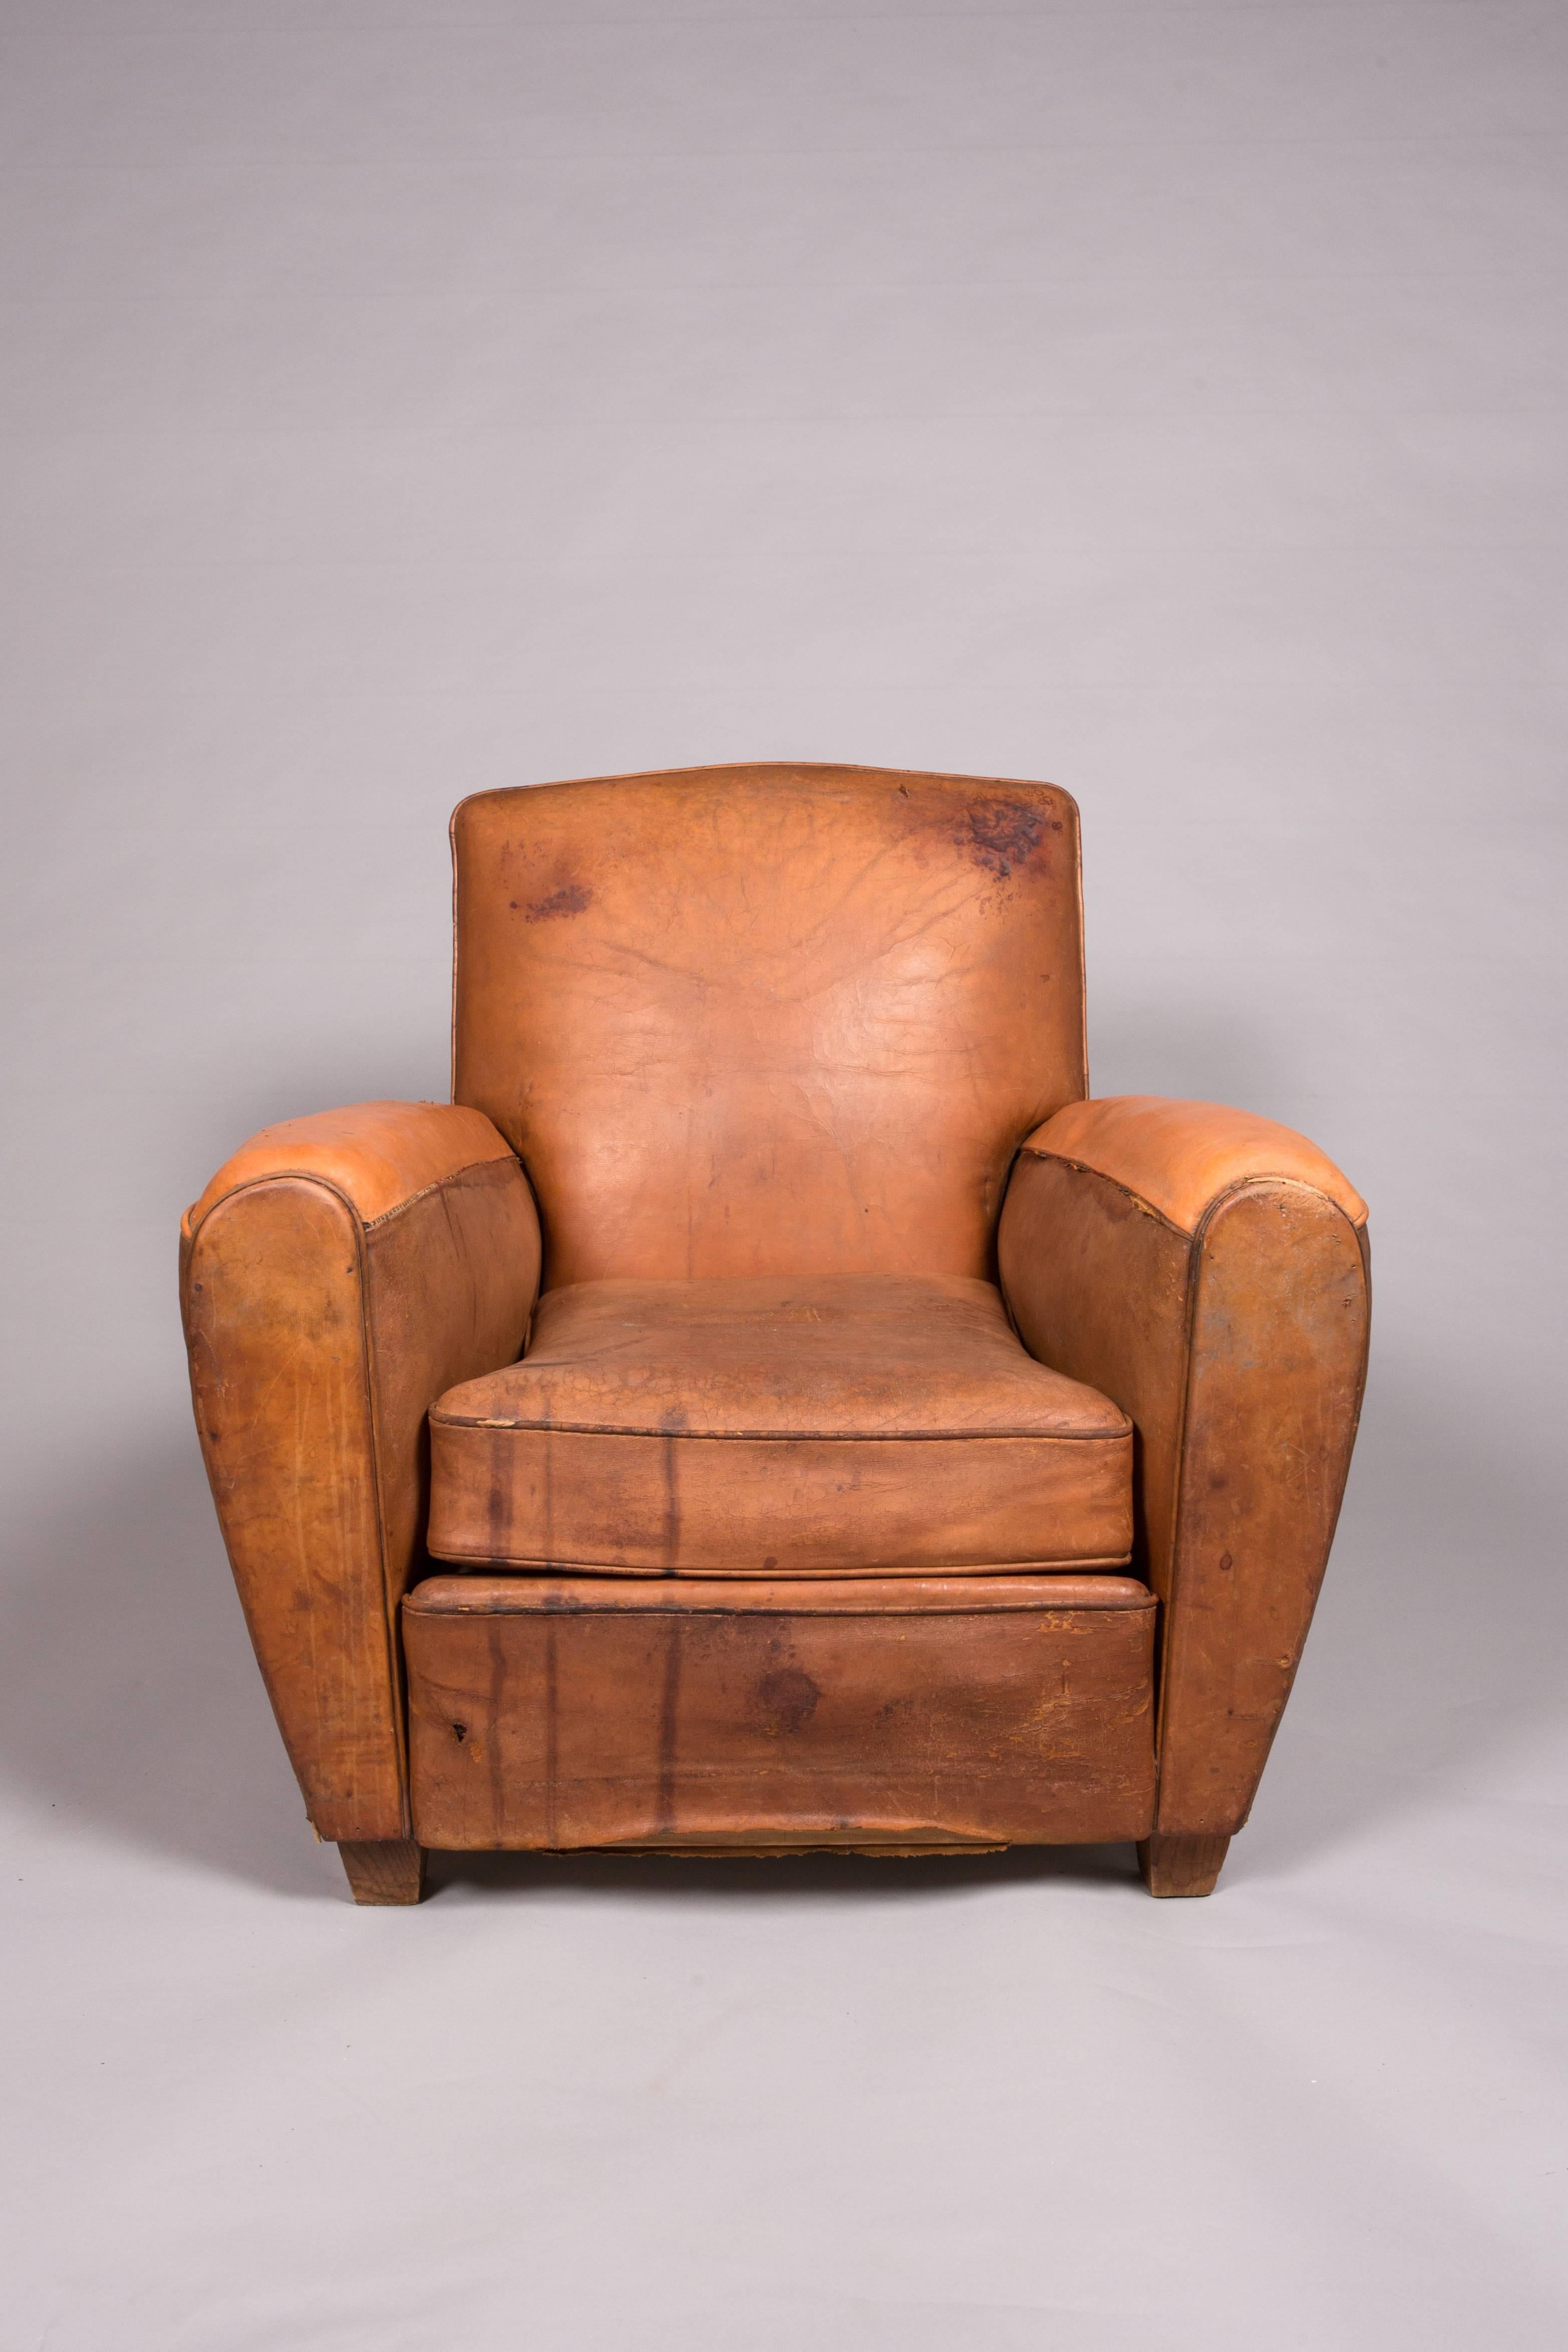 The beat up leather chair never goes out of style! Un-replicable patina and aging. This one of a kind chair is perfect for your home office or movie set. One of a kind!
16" seat height. 23.5" seat depth. 20.5" seat width. 23" arm